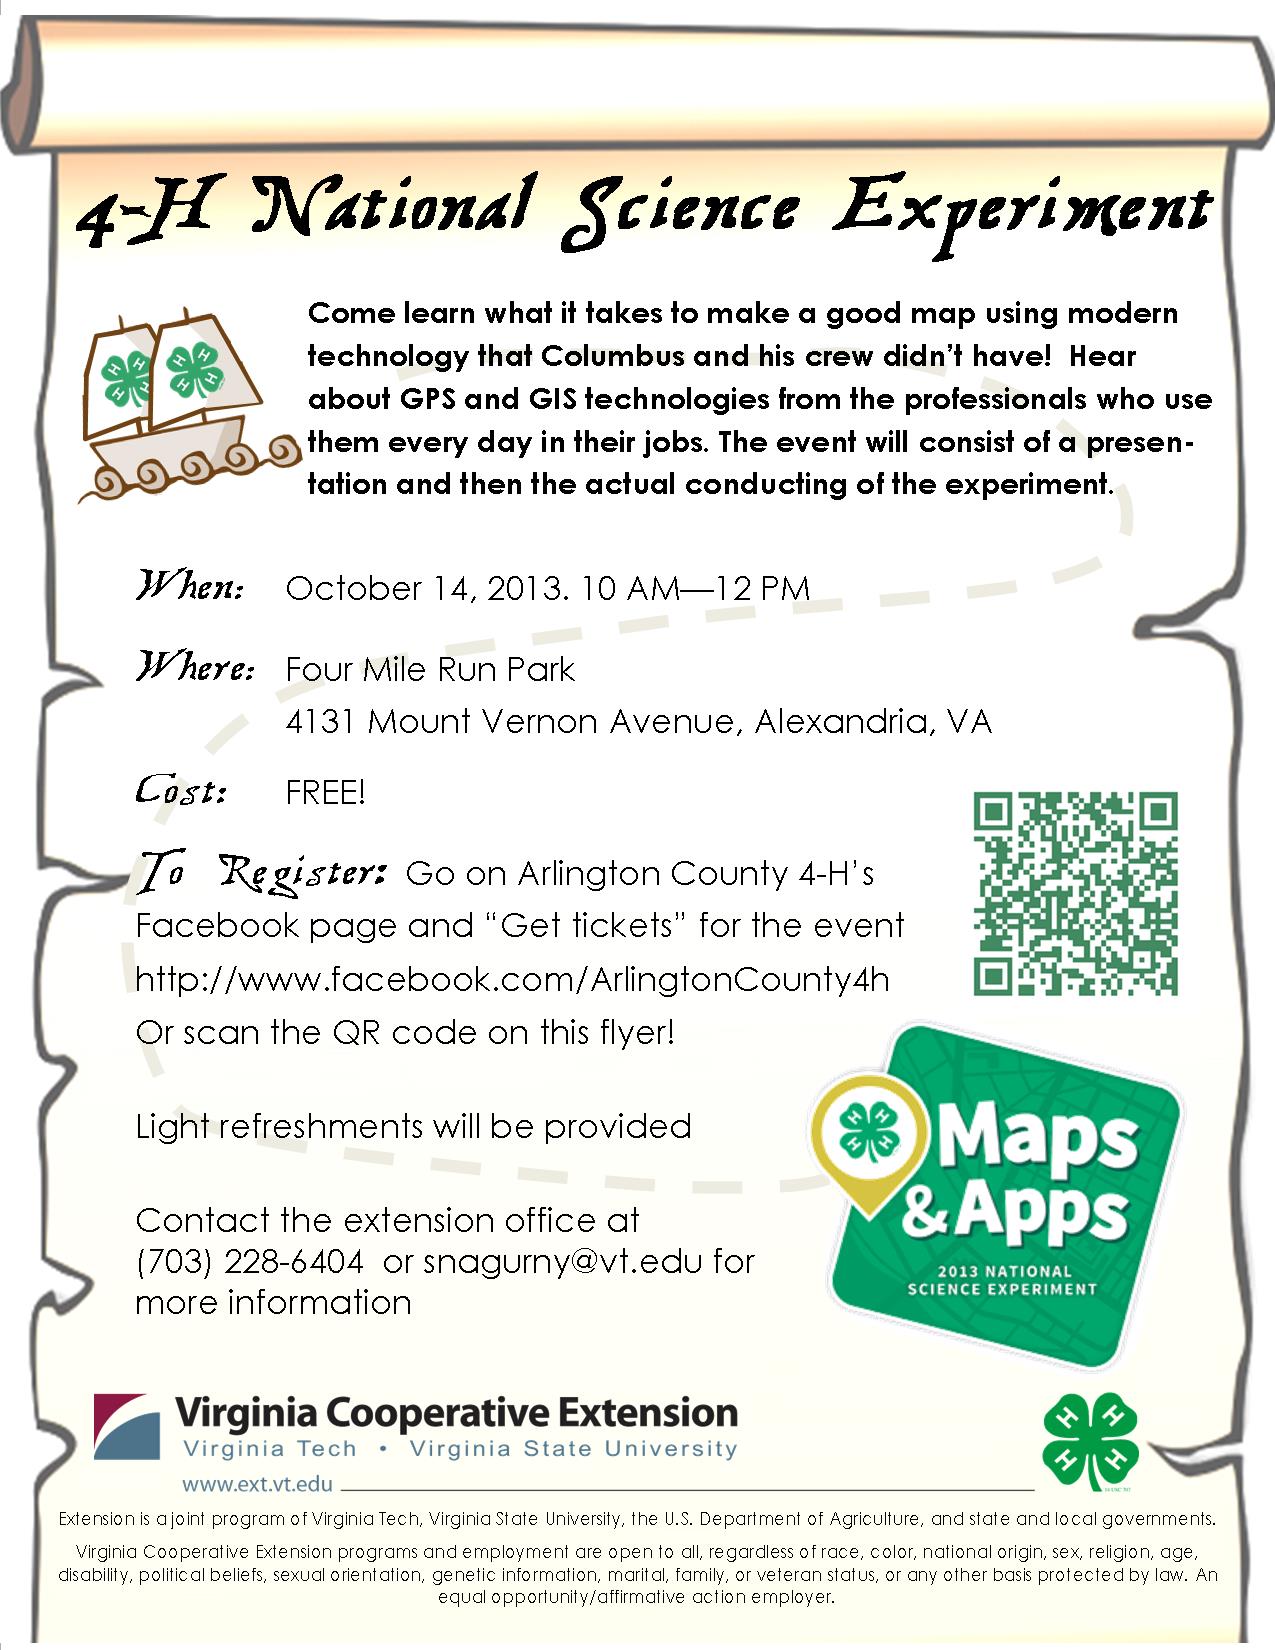 4-H National Youth Science Experiment! Arlington and Alexandria Virginia Cooperative Extension